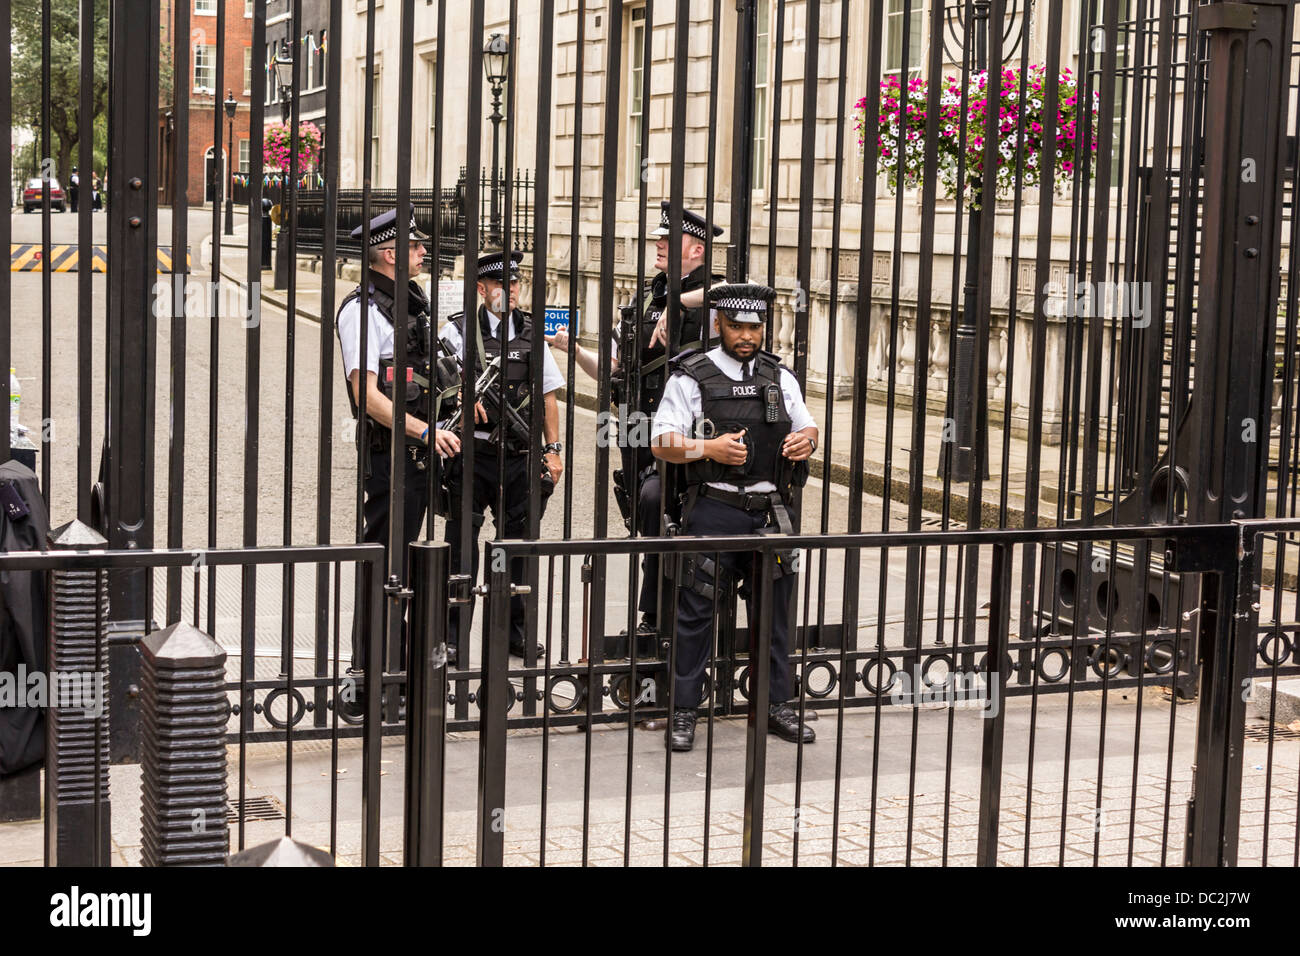 Number 10 Downing Street Security Gate Stock Photo